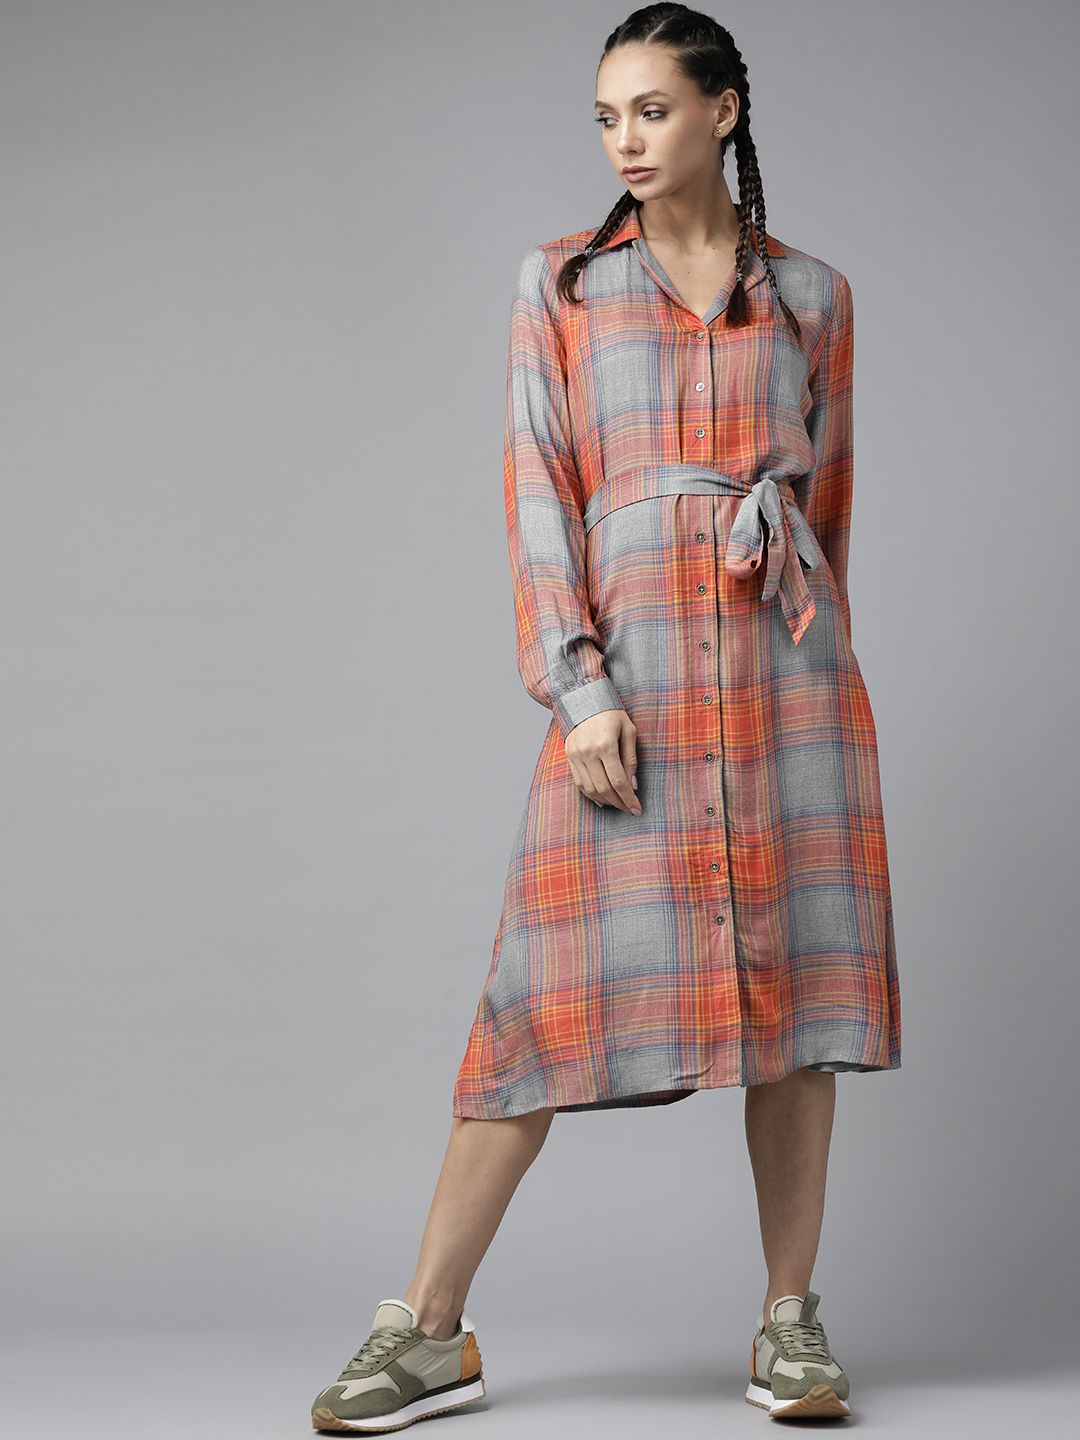 Roadster Women Orange & Grey Checked Shirt Midi Dress with A Belt Price in India